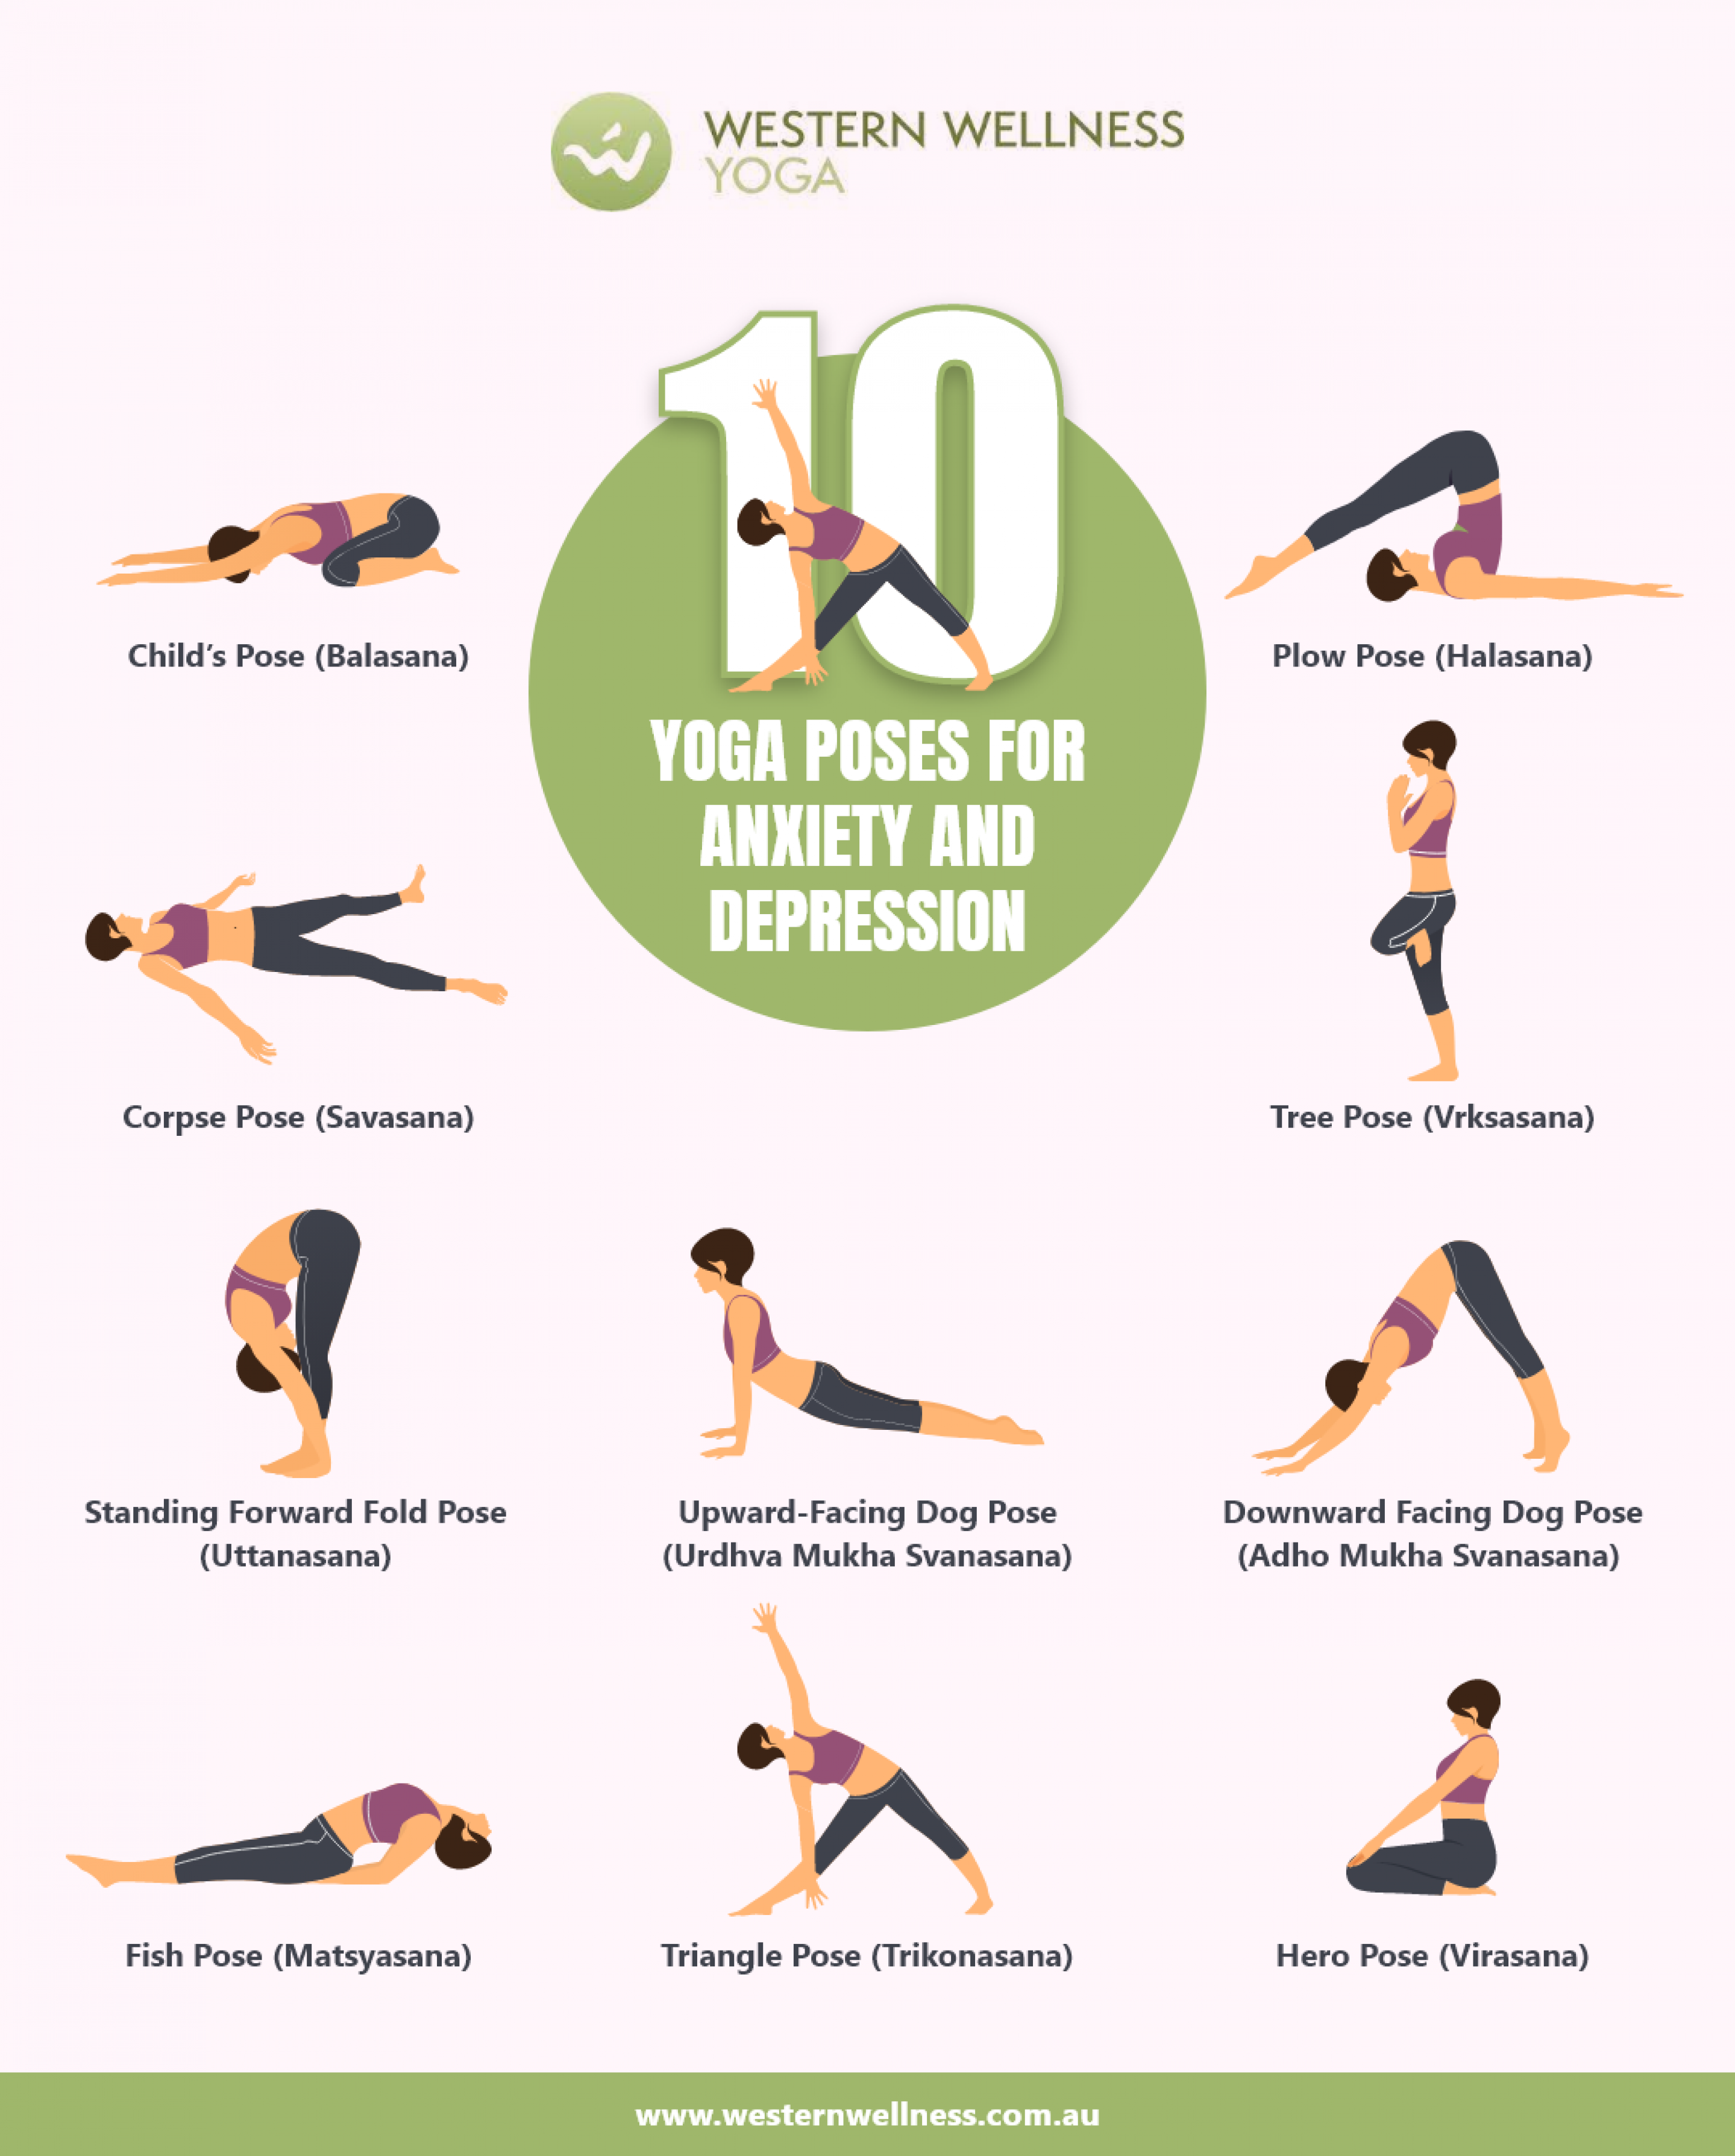 10 yoga poses for anxiety and depression